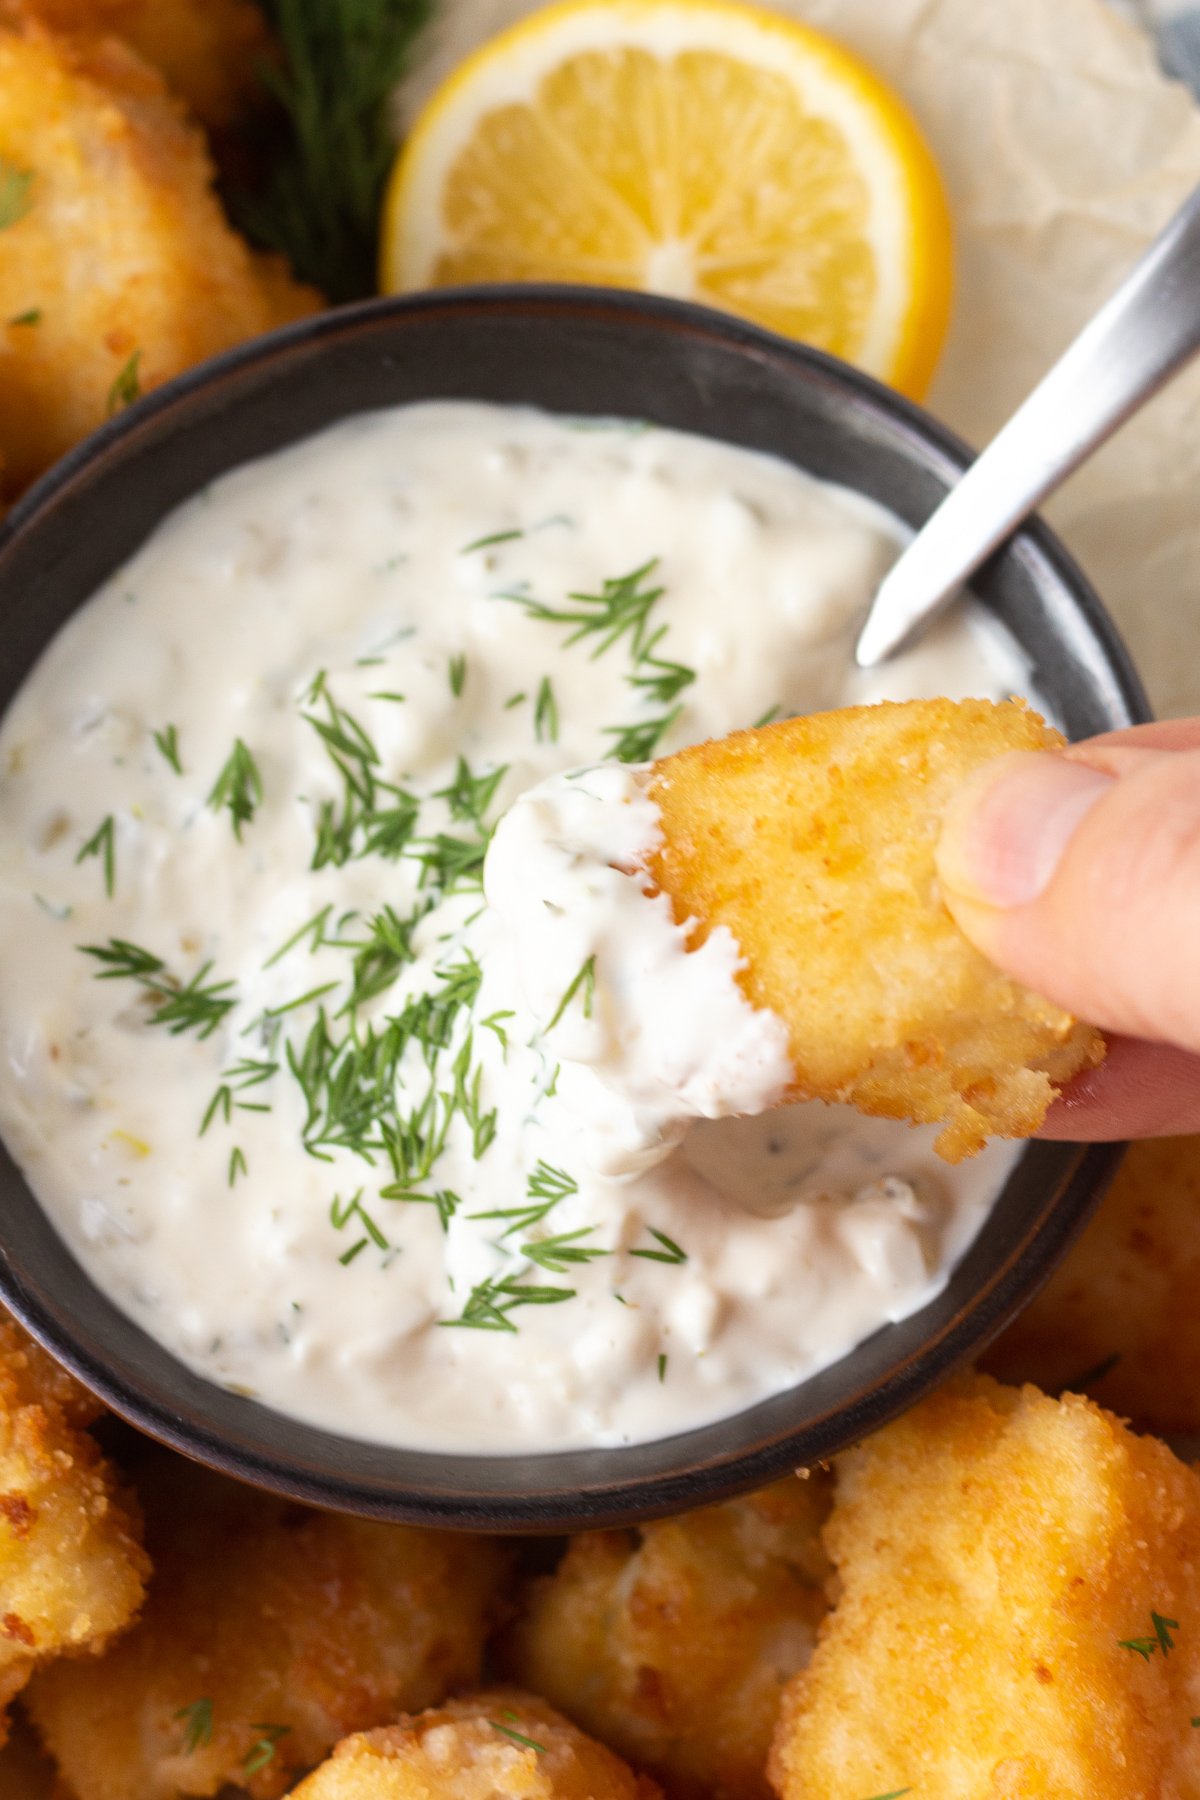 Fingers dipping a piece of fried walleye into a bowl of tartar sauce.